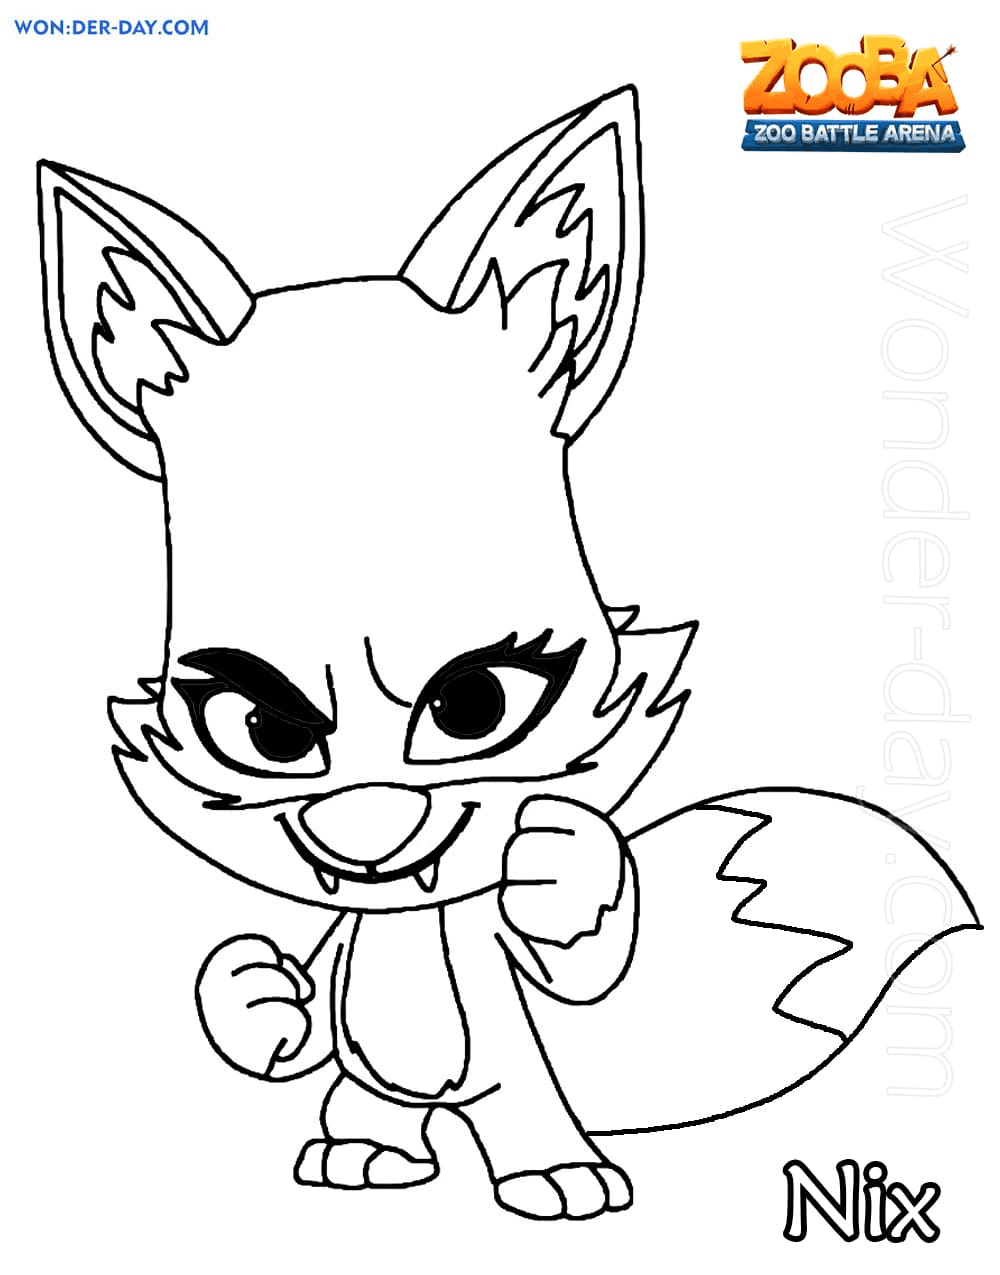 Nix Zooba Coloring Pages - Zooba Coloring Pages - Coloring Pages For Kids  And Adults